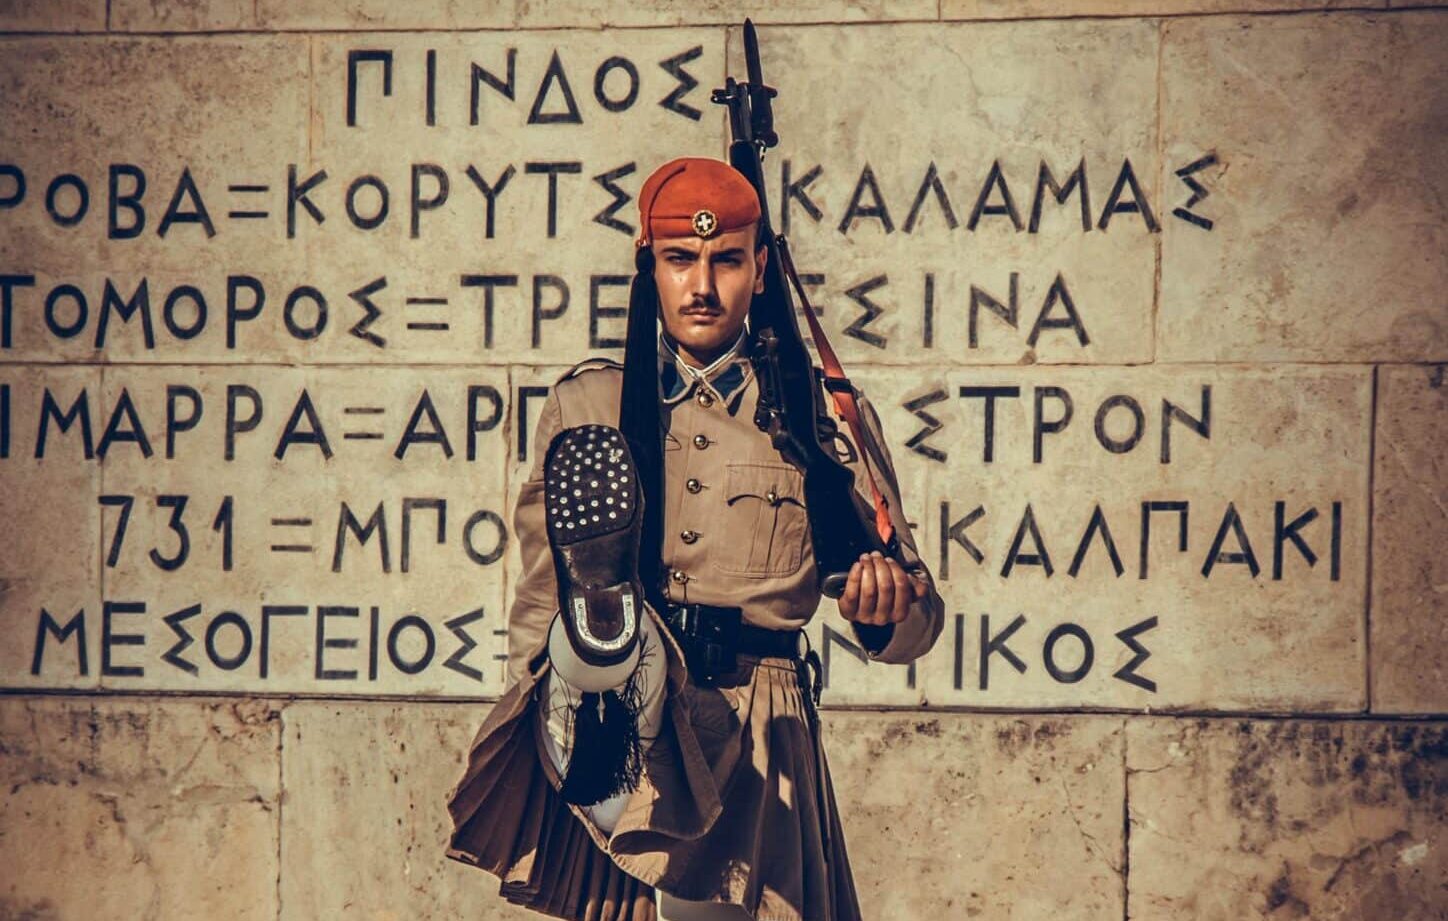 The Evzones or Evzonoi, is the name of several historical elite light infantry and mountain units of the Greek Army. Today, it refers to the members of the Presidential Guard, a ceremonial unit that guards the Greek Tomb of the Unknown Soldier and the Presidential Mansion in Athens.